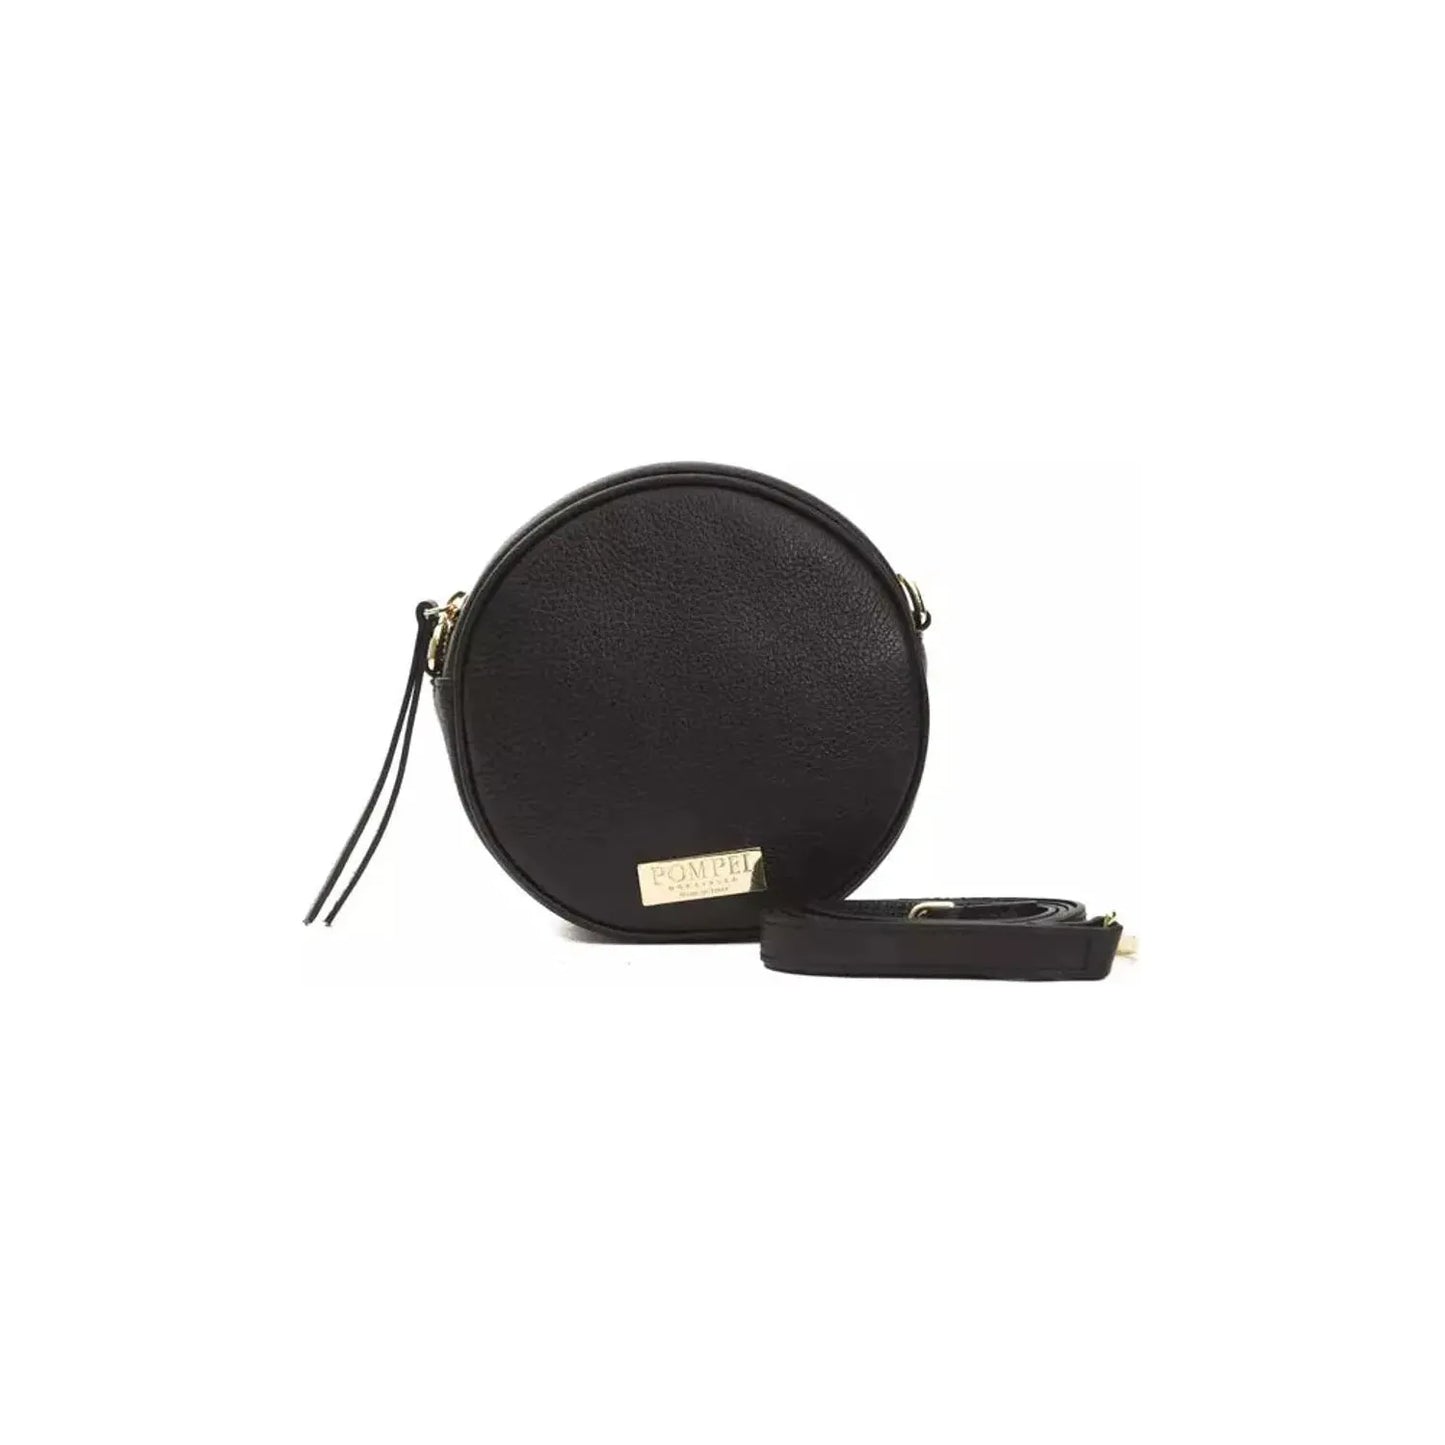 Pompei Donatella Small Oval Leather Crossbody Elegance Crossbody Bag black-leather-crossbody-bag stock_product_image_5813_1132623226-30-2e10599a-af2.webp